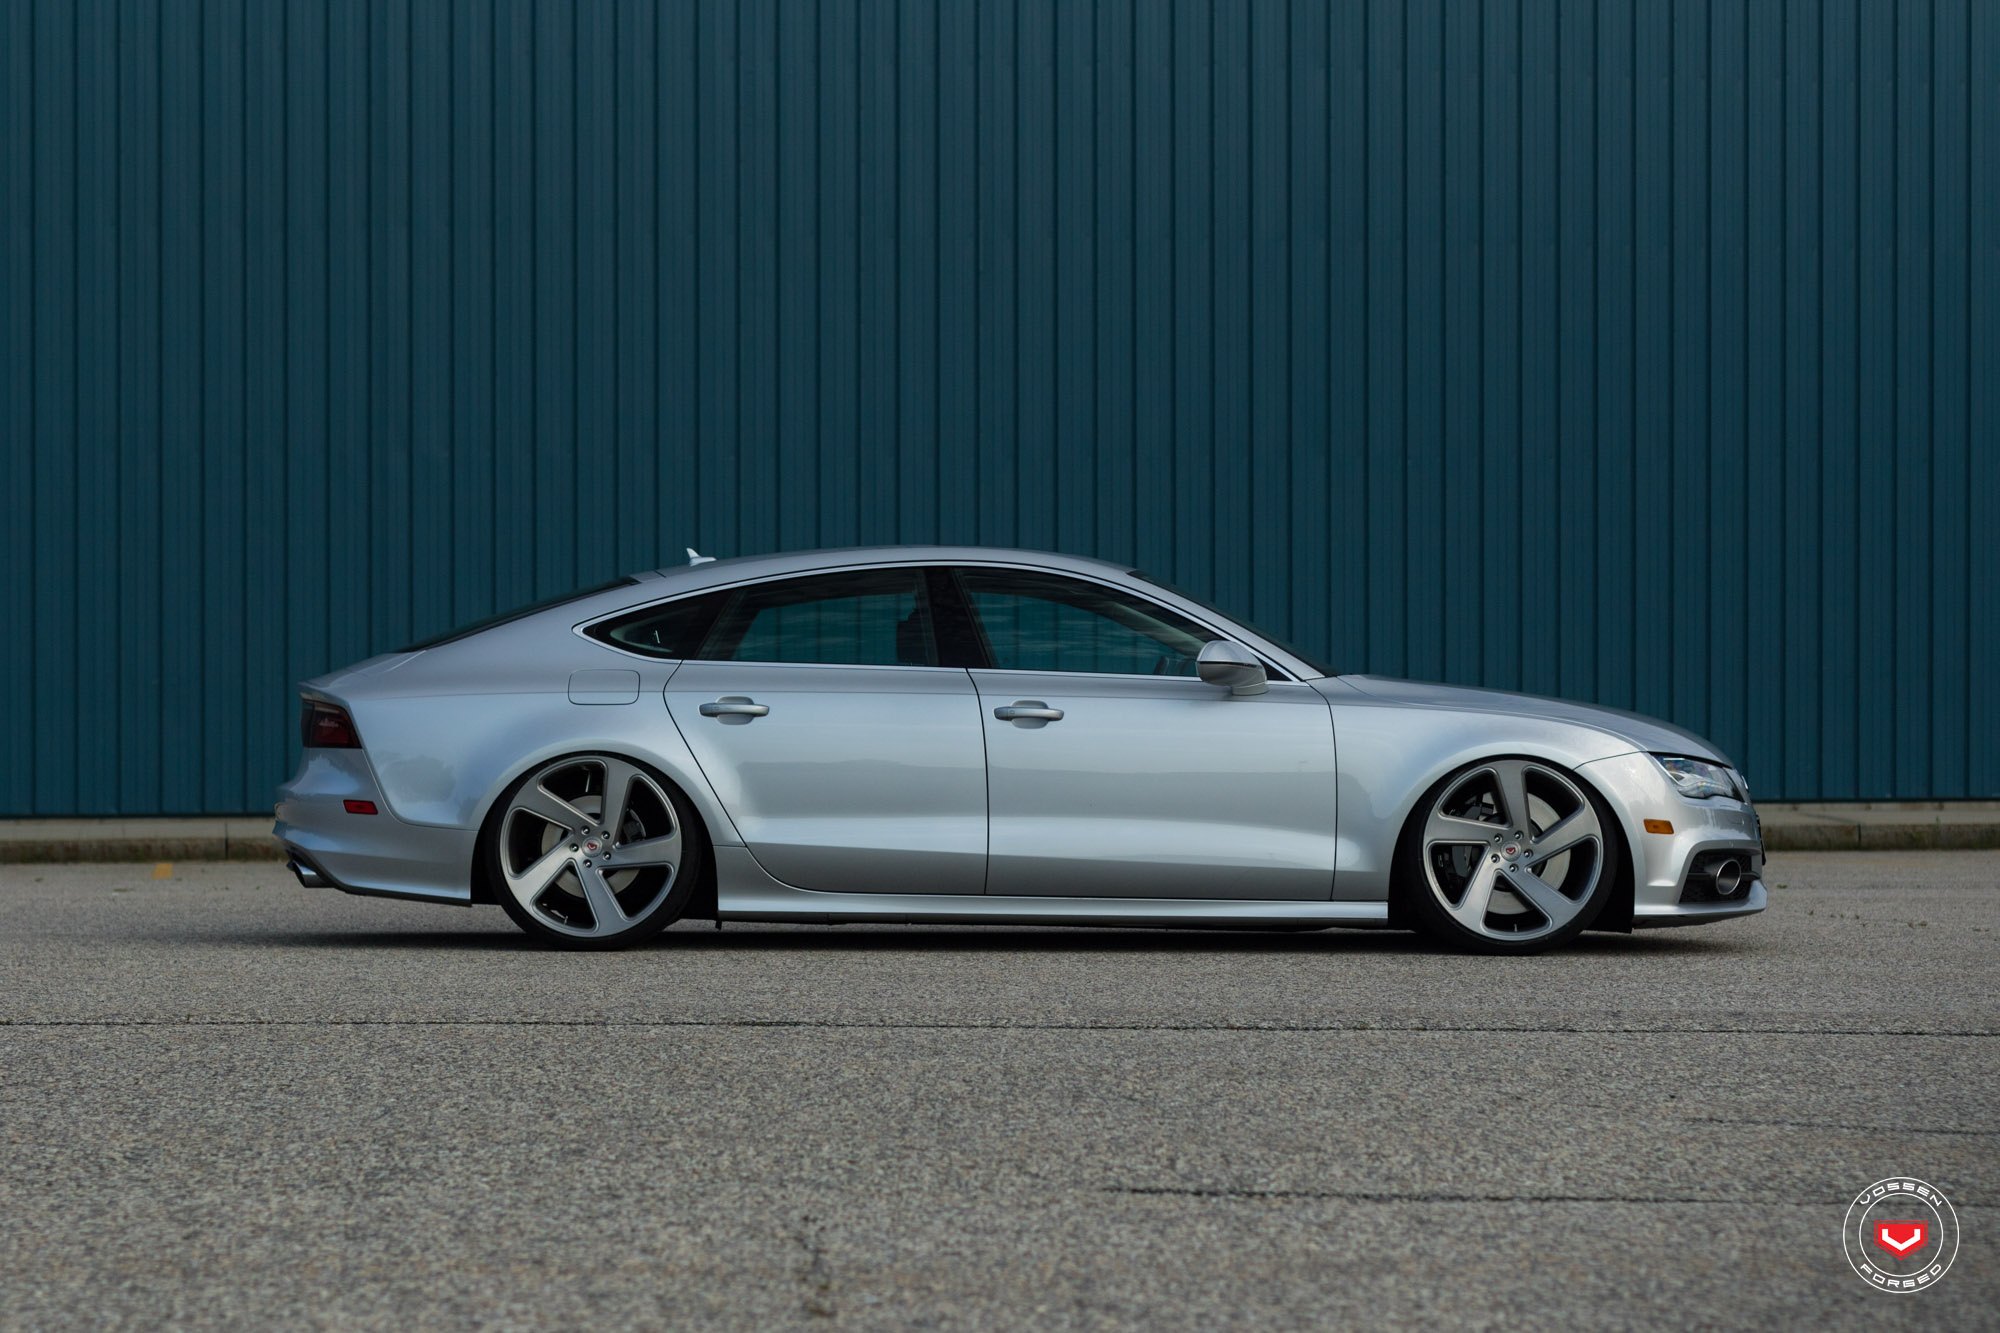 Forged Vossen Wheels on Gray Audi A7 - Photo by Vossen